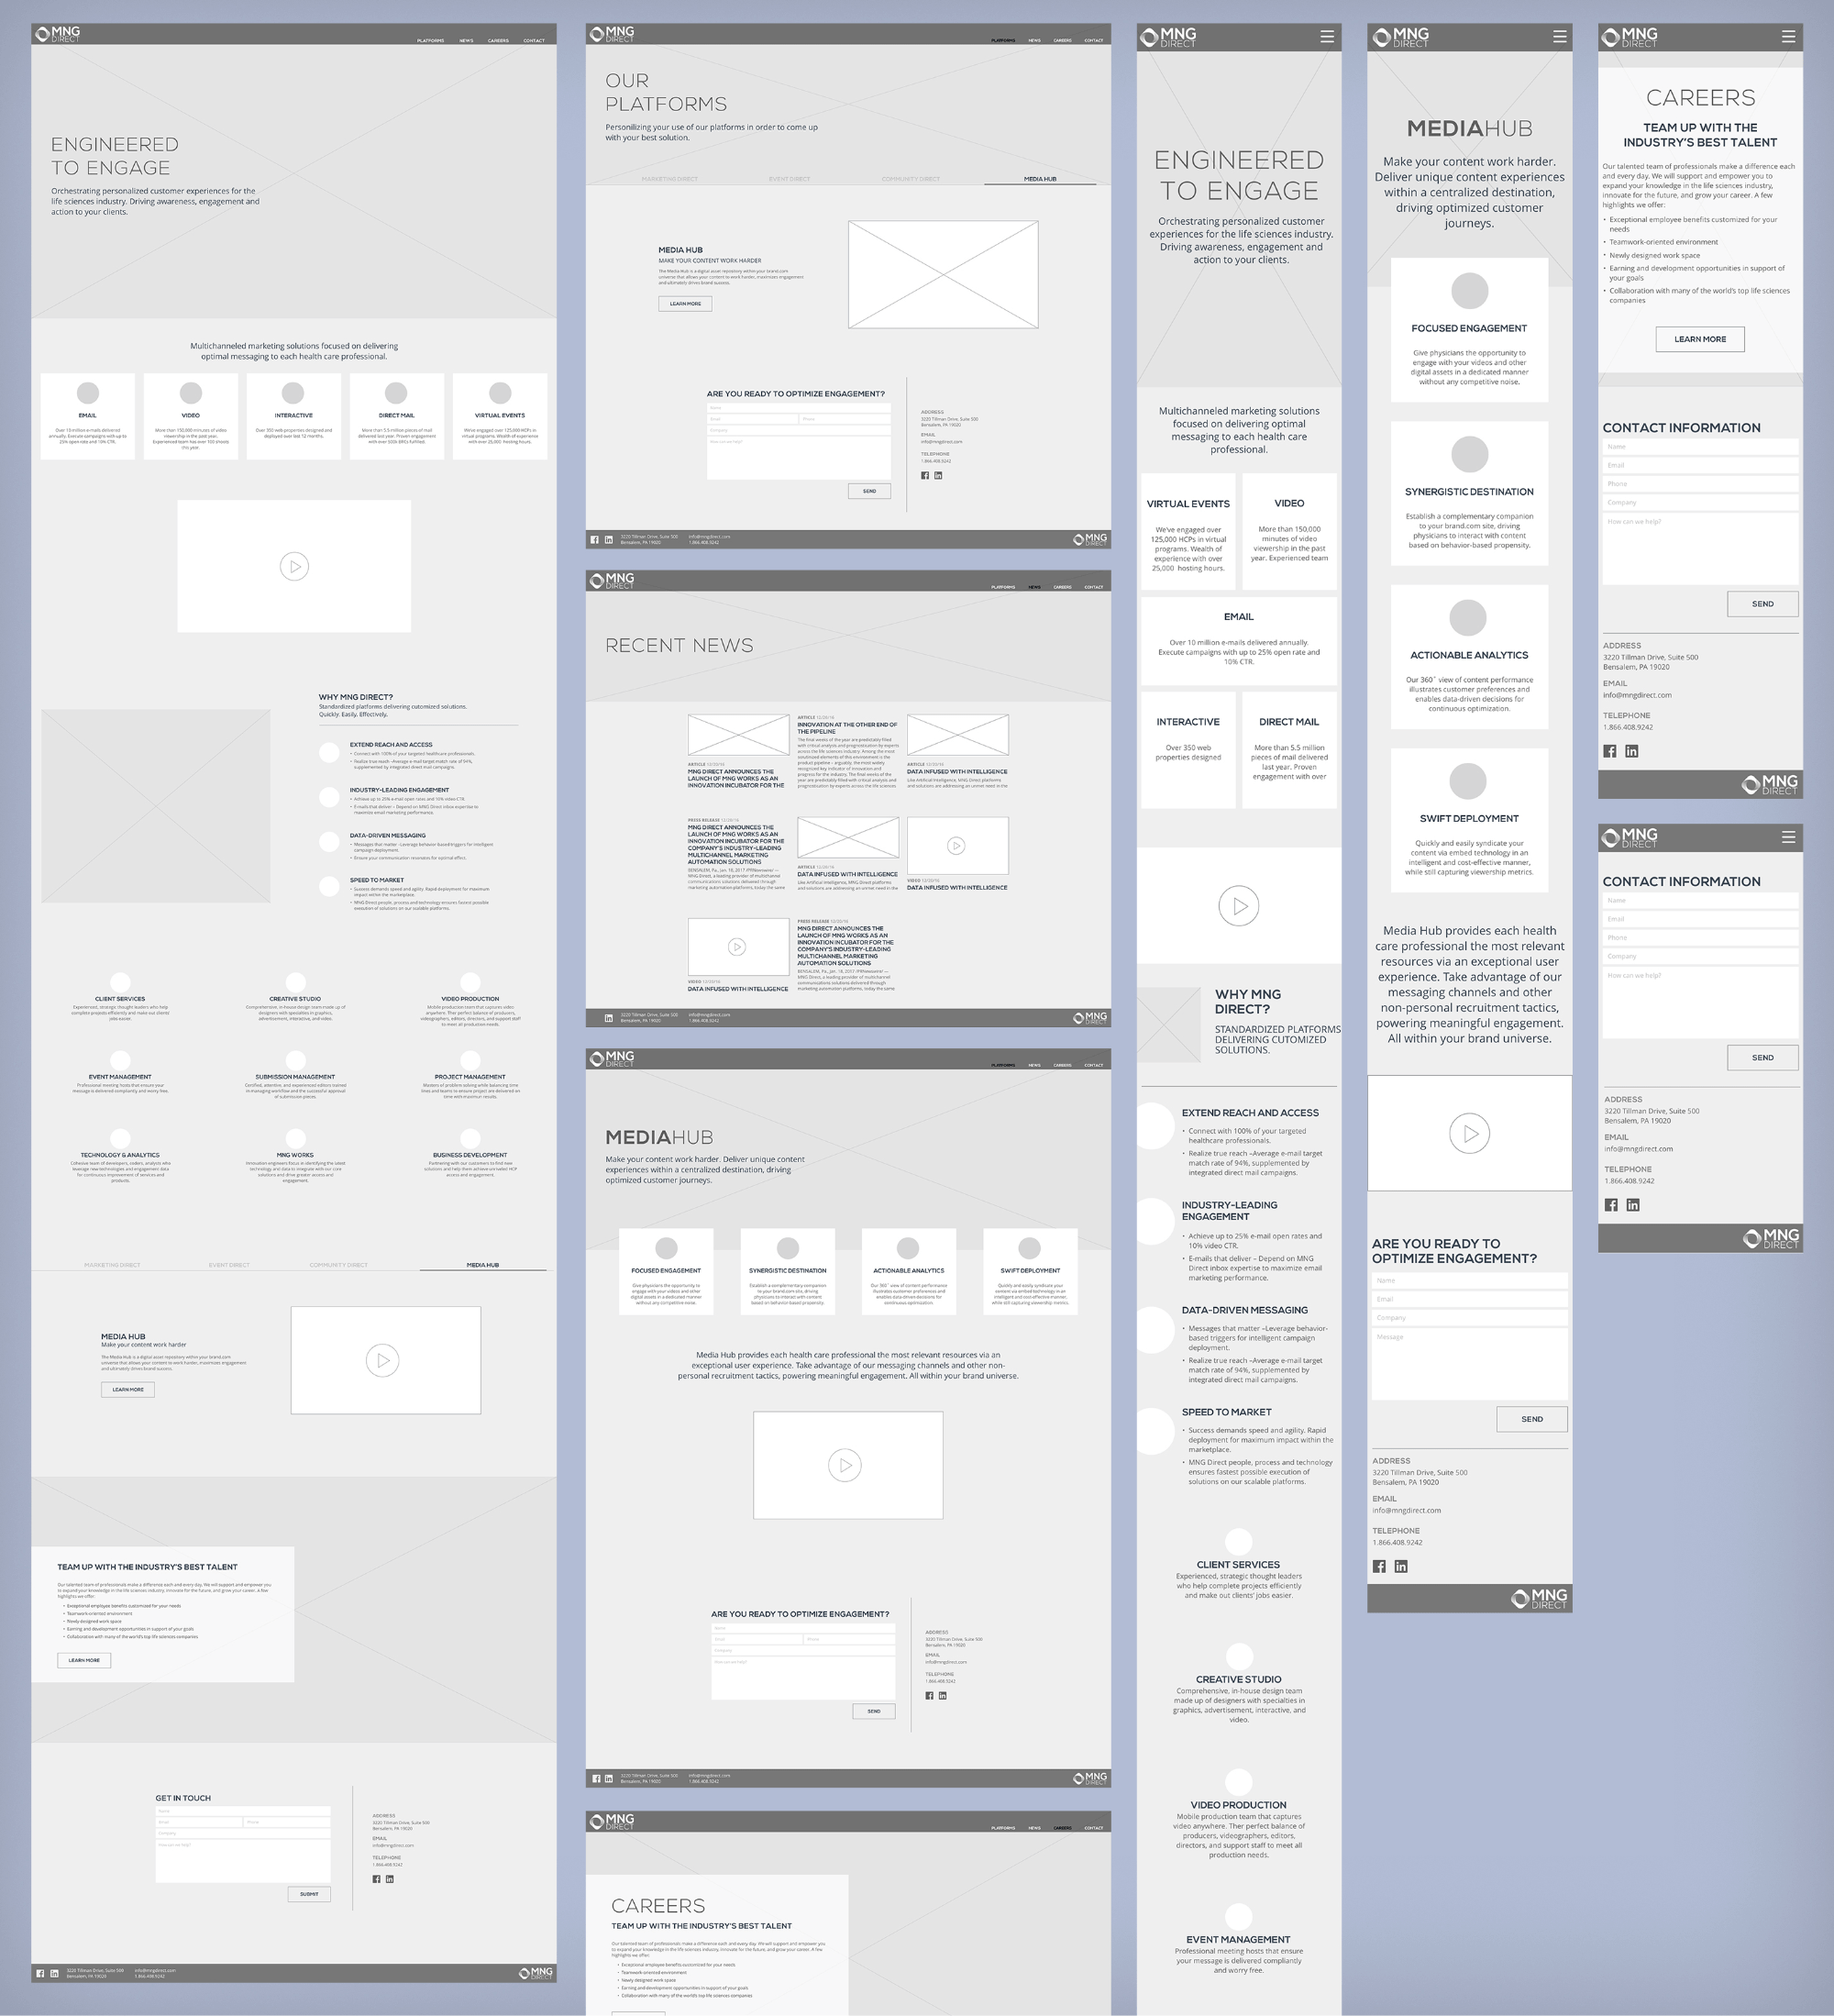 Wireframes of how the website would flow after the redesign.